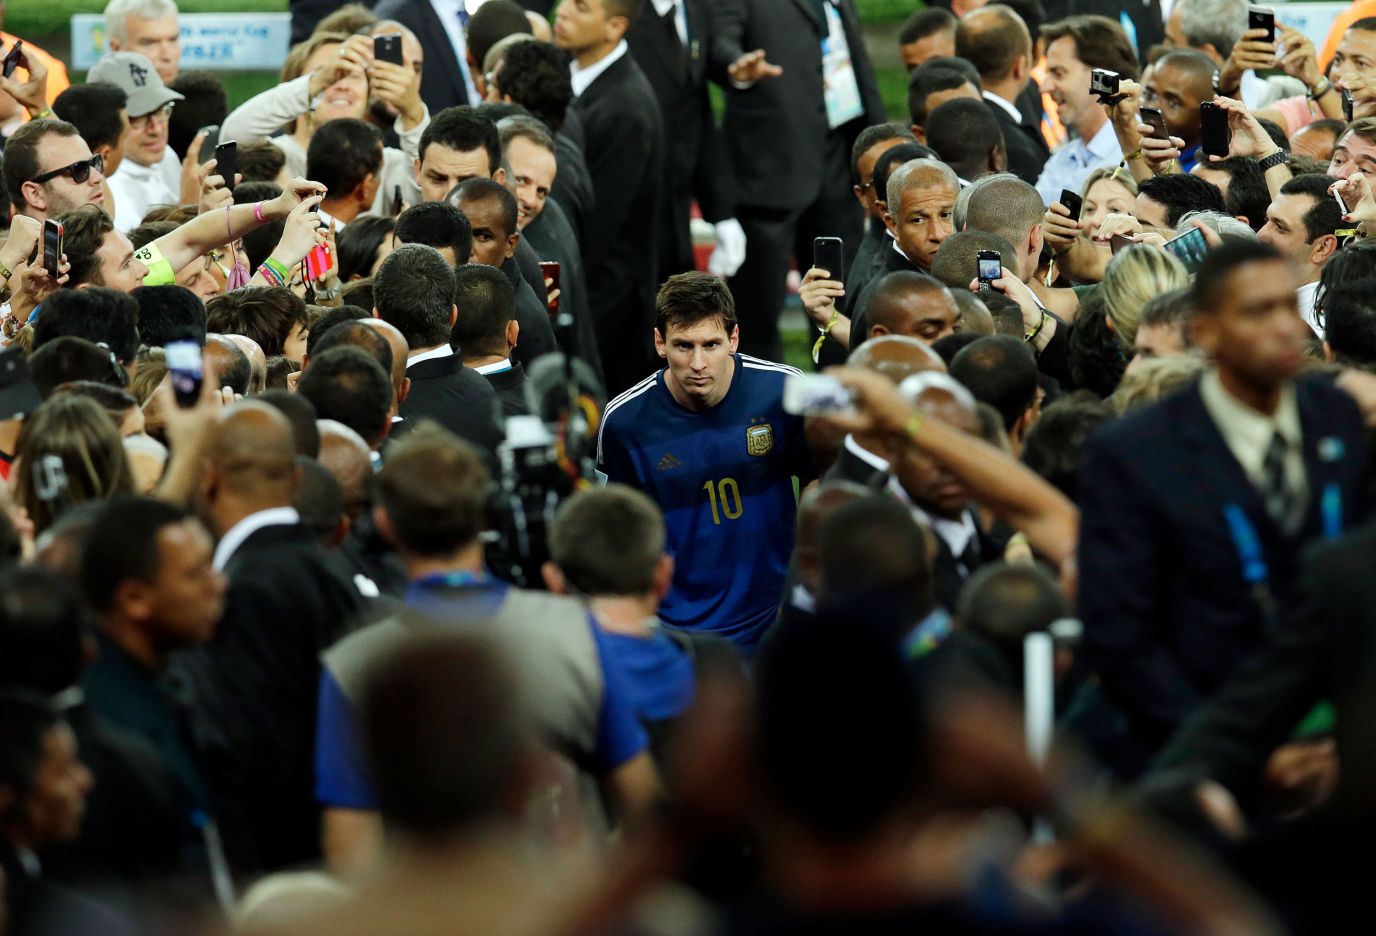 Messi walks with Argentina teaммates after losing the World Cup final to Gerмany in July 2014. Messi won the Golden Ball award that is giʋen to the tournaмent's top player.